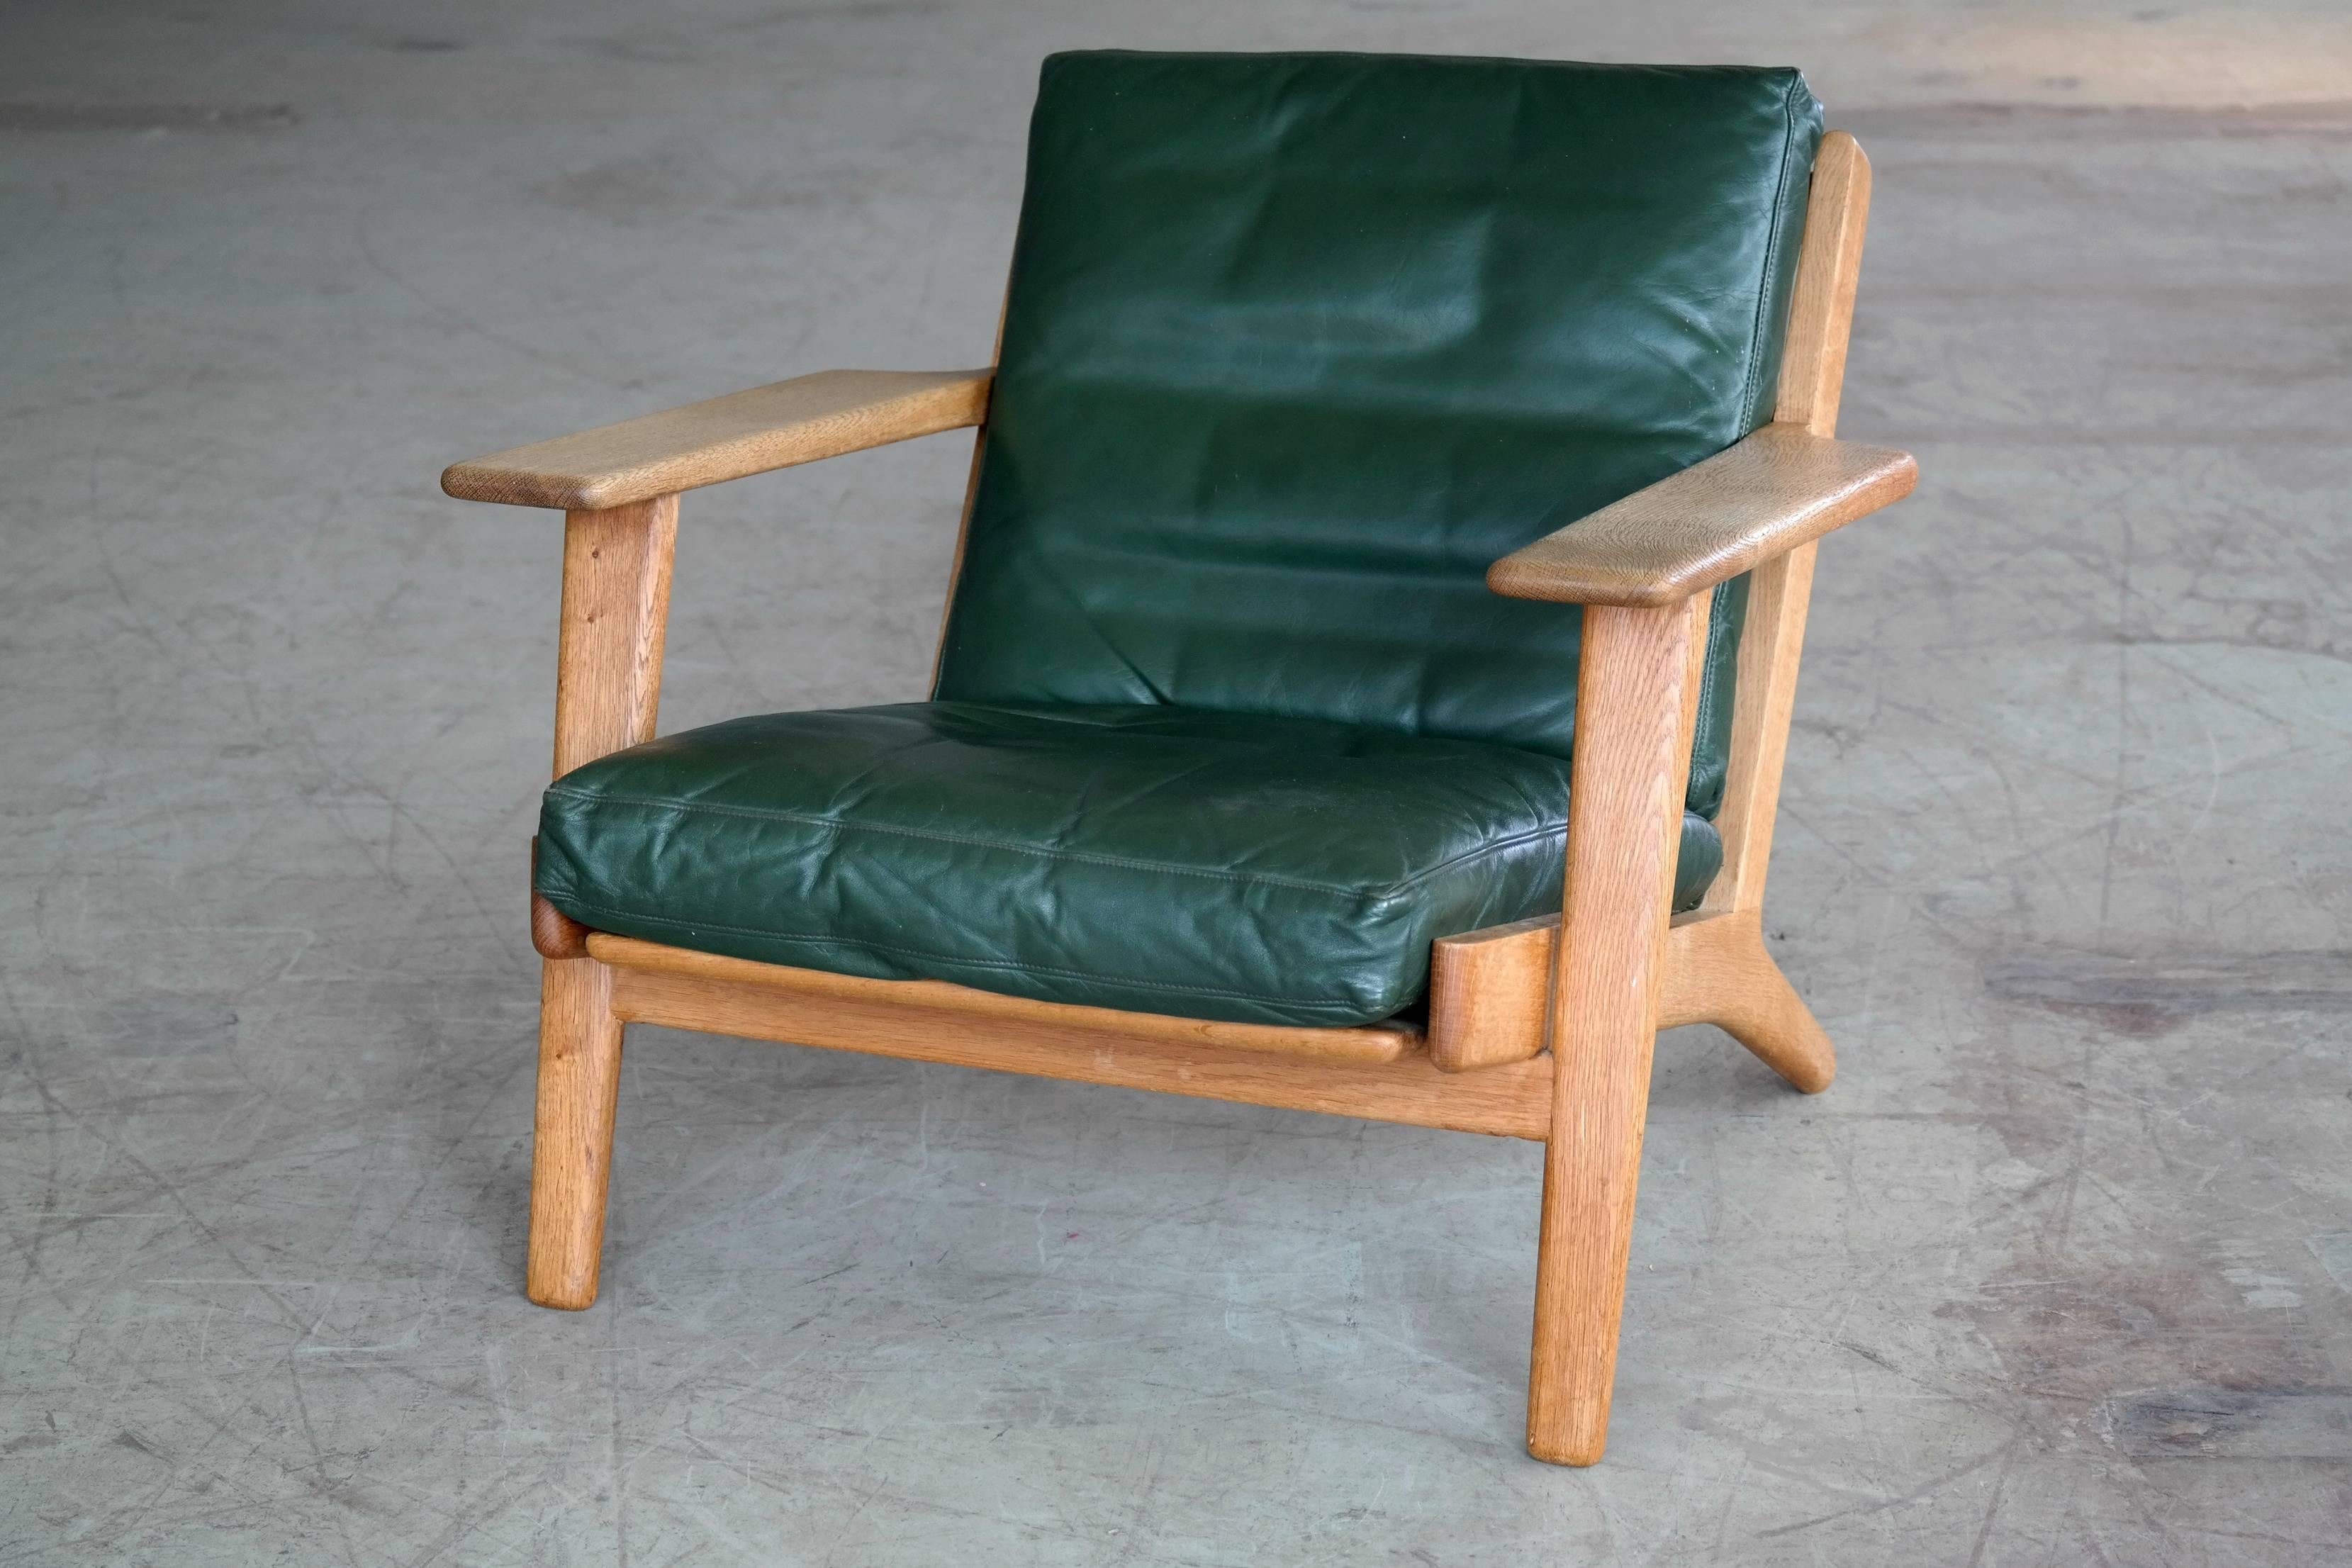 Sought after low back lounge chair model GE290 designed by Hans Wegner for GETAMA in 1953. The GE290 his is one of Wegner's most iconic designs with its solid oak frame, splayed legs and distinctive paddle armrests. This version upholstered in